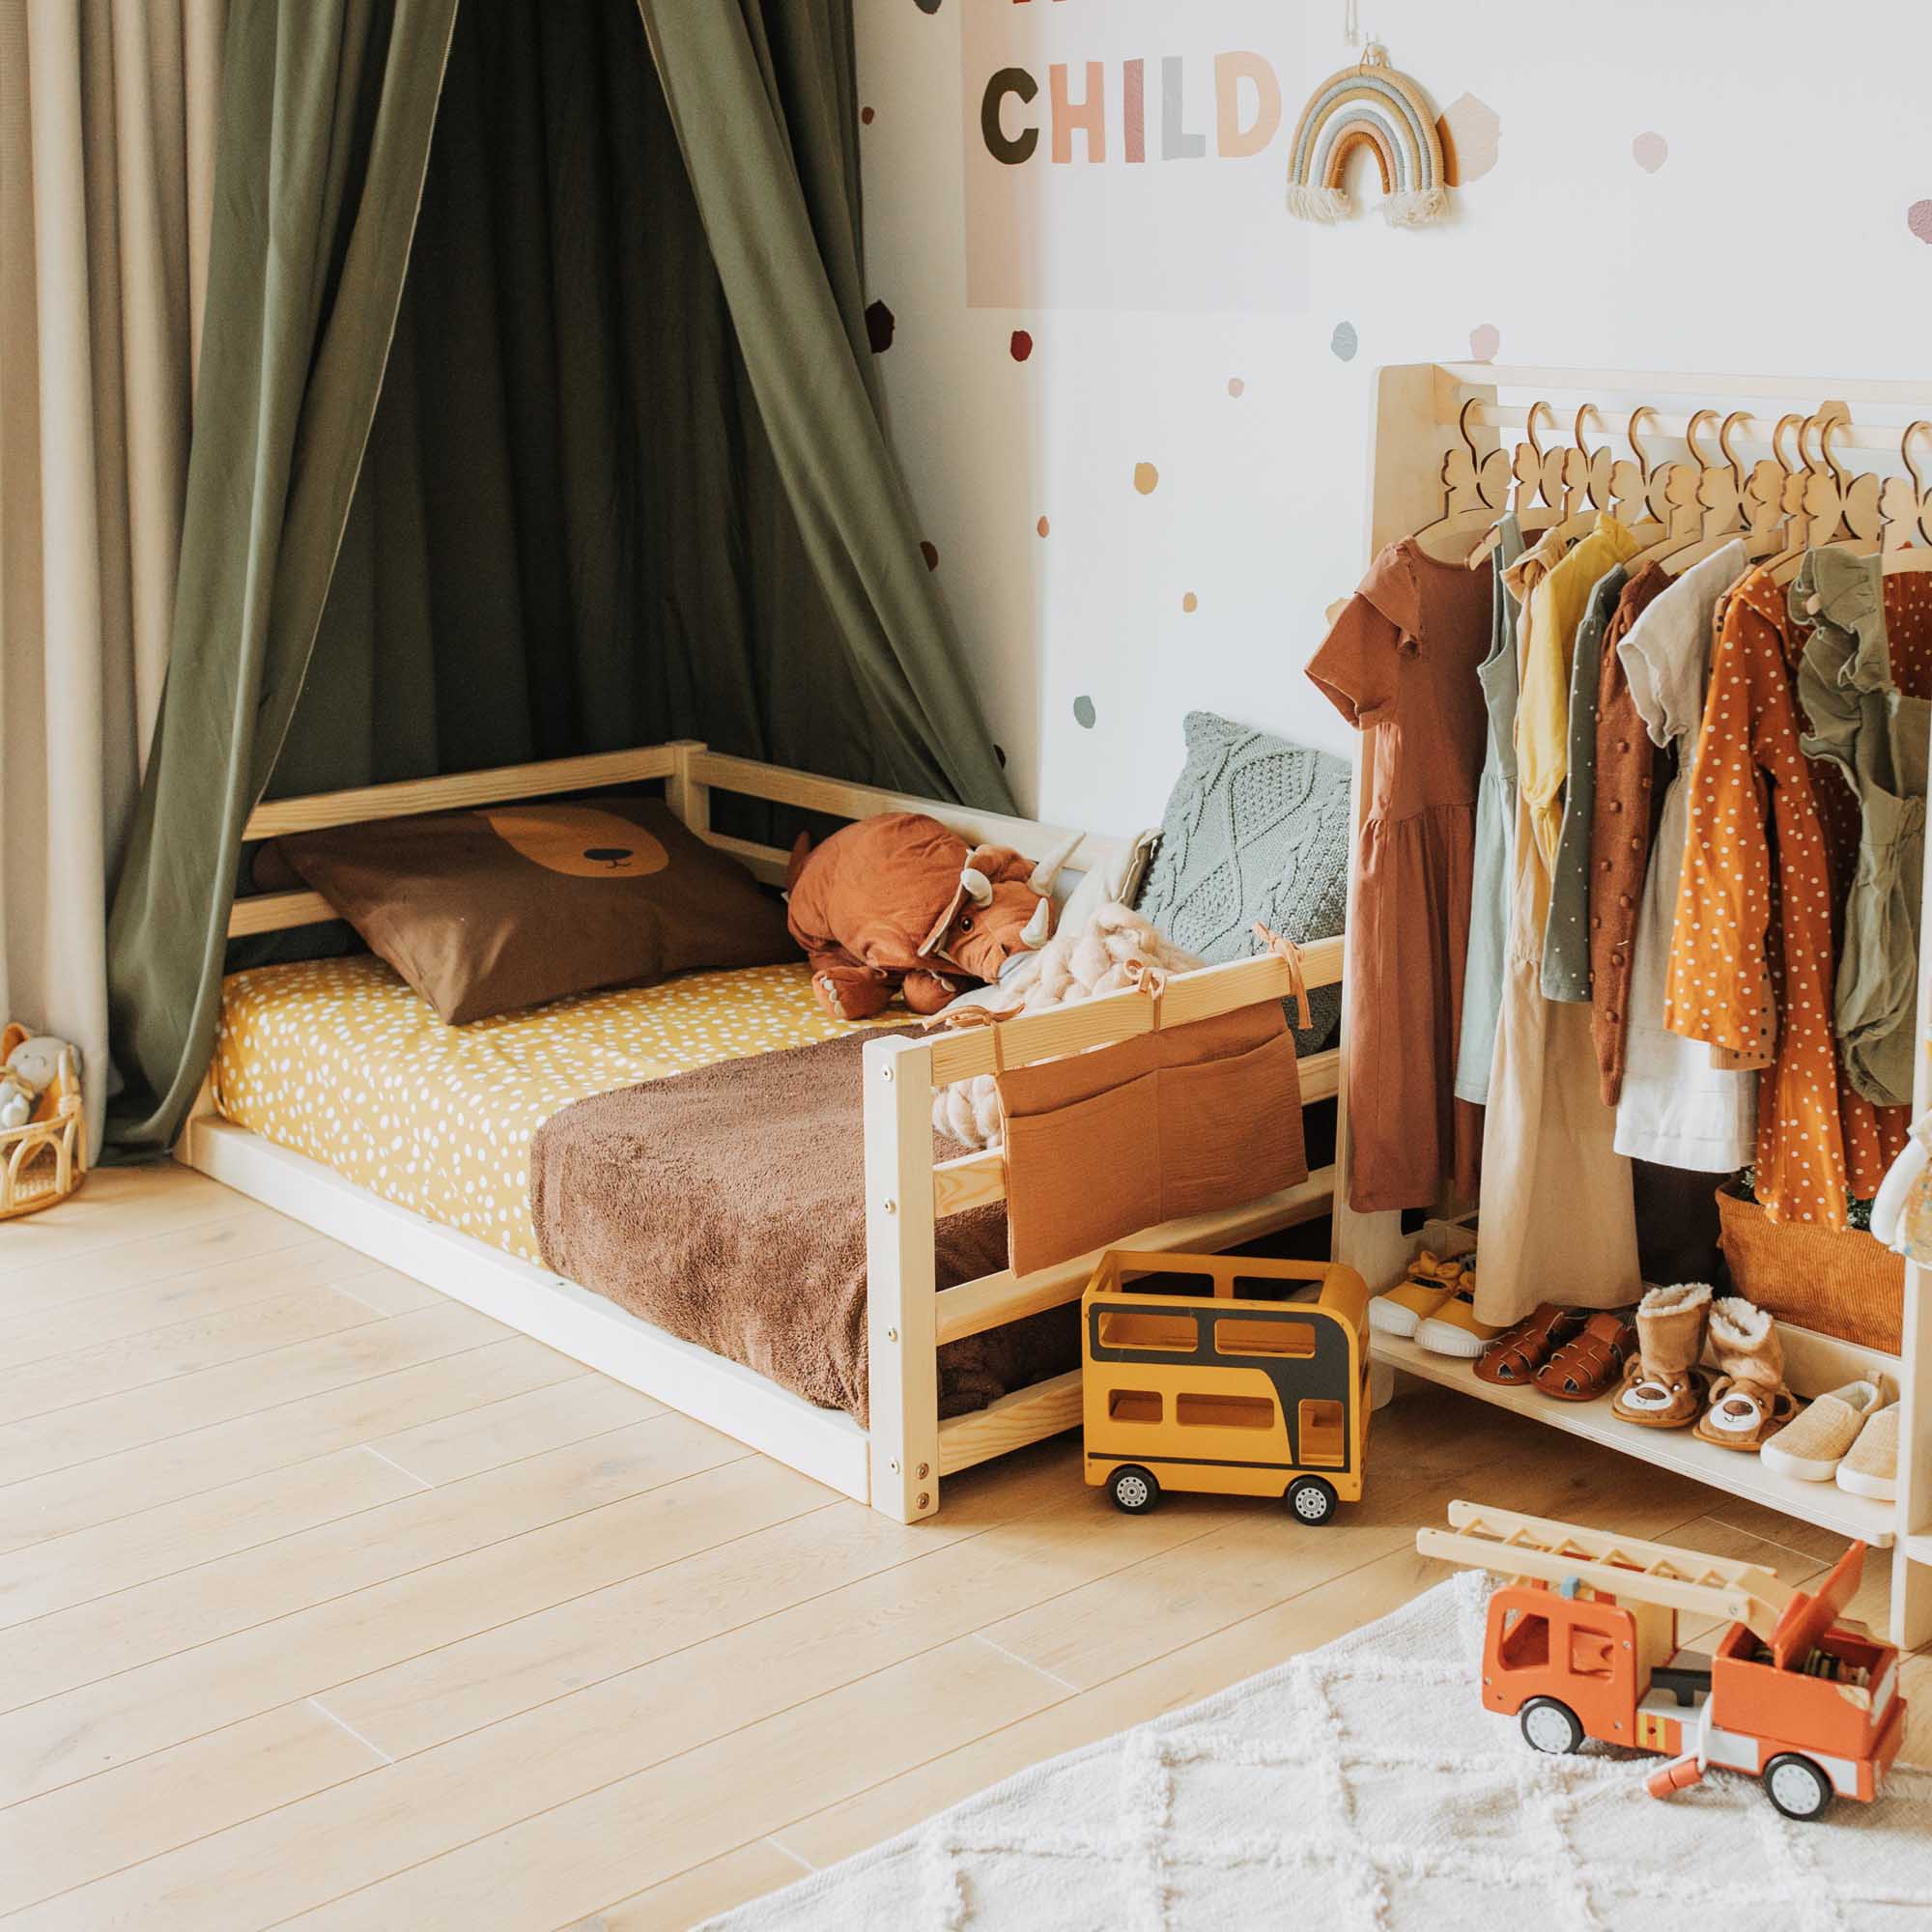 A child's room with a bed, clothes and toys.